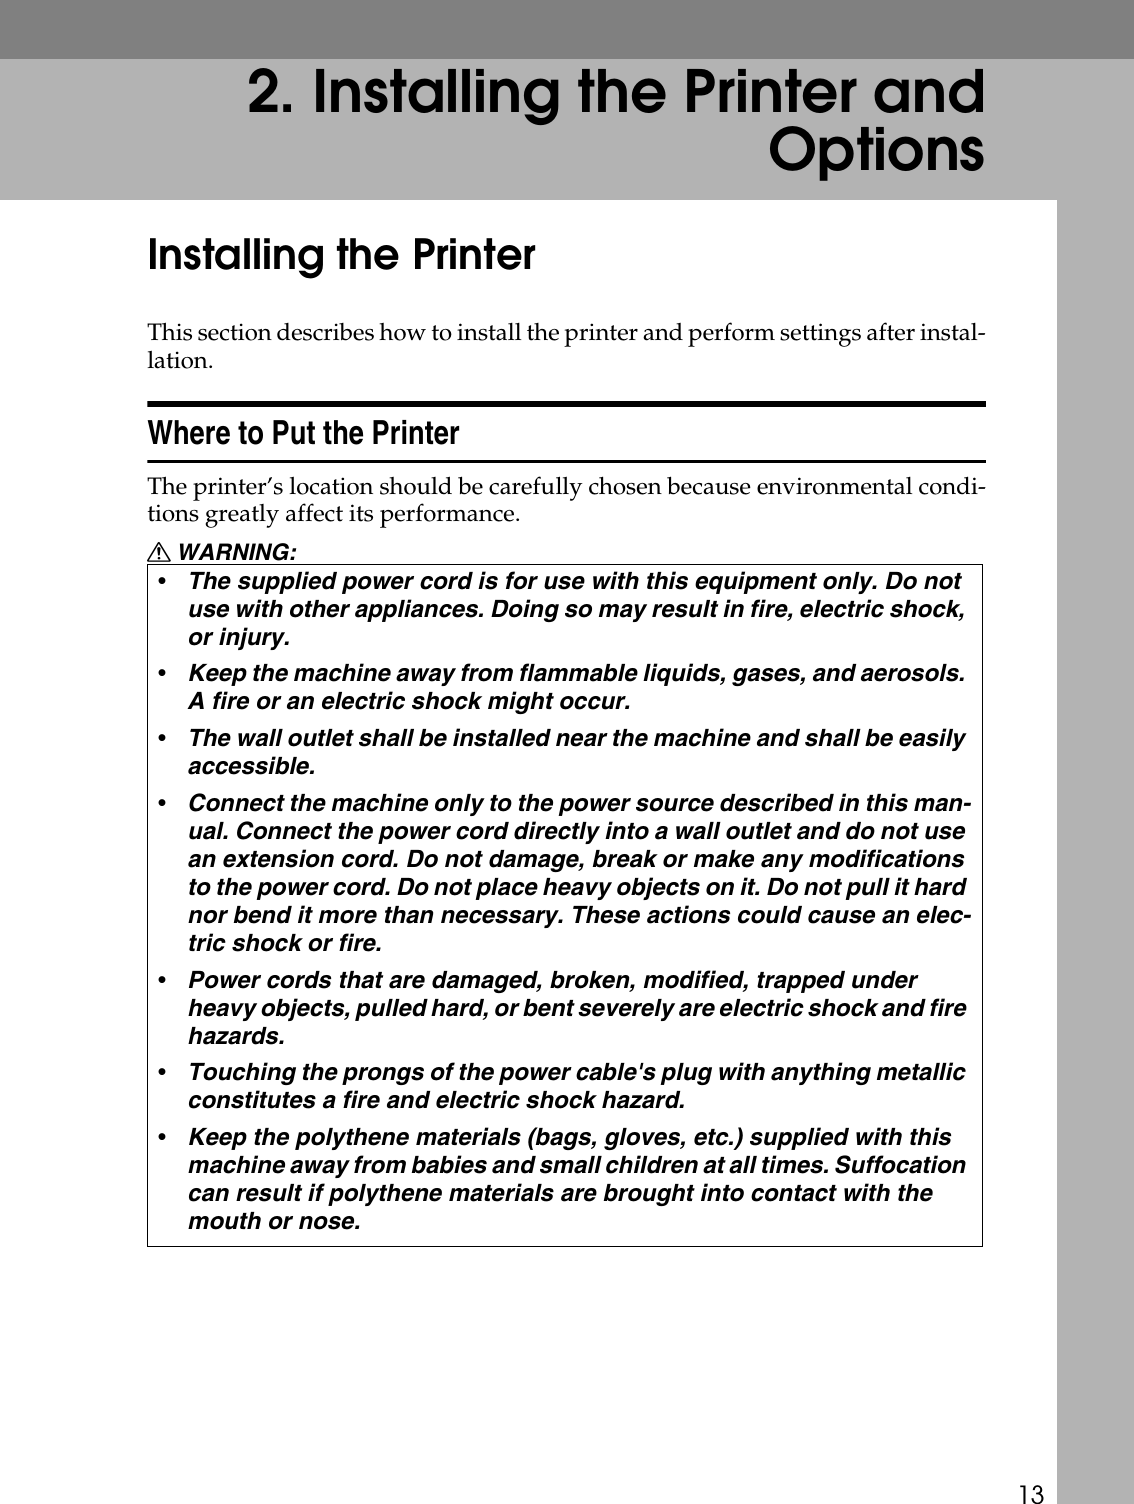 132. Installing the Printer andOptionsInstalling the PrinterThis section describes how to install the printer and perform settings after instal-lation.Where to Put the PrinterThe printer’s location should be carefully chosen because environmental condi-tions greatly affect its performance.R WARNING:•The supplied power cord is for use with this equipment only. Do not use with other appliances. Doing so may result in fire, electric shock, or injury.•Keep the machine away from flammable liquids, gases, and aerosols. A fire or an electric shock might occur.•The wall outlet shall be installed near the machine and shall be easily accessible.•Connect the machine only to the power source described in this man-ual. Connect the power cord directly into a wall outlet and do not use an extension cord. Do not damage, break or make any modifications to the power cord. Do not place heavy objects on it. Do not pull it hard nor bend it more than necessary. These actions could cause an elec-tric shock or fire.•Power cords that are damaged, broken, modified, trapped under heavy objects, pulled hard, or bent severely are electric shock and fire hazards.•Touching the prongs of the power cable&apos;s plug with anything metallic constitutes a fire and electric shock hazard.•Keep the polythene materials (bags, gloves, etc.) supplied with this machine away from babies and small children at all times. Suffocation can result if polythene materials are brought into contact with the mouth or nose.